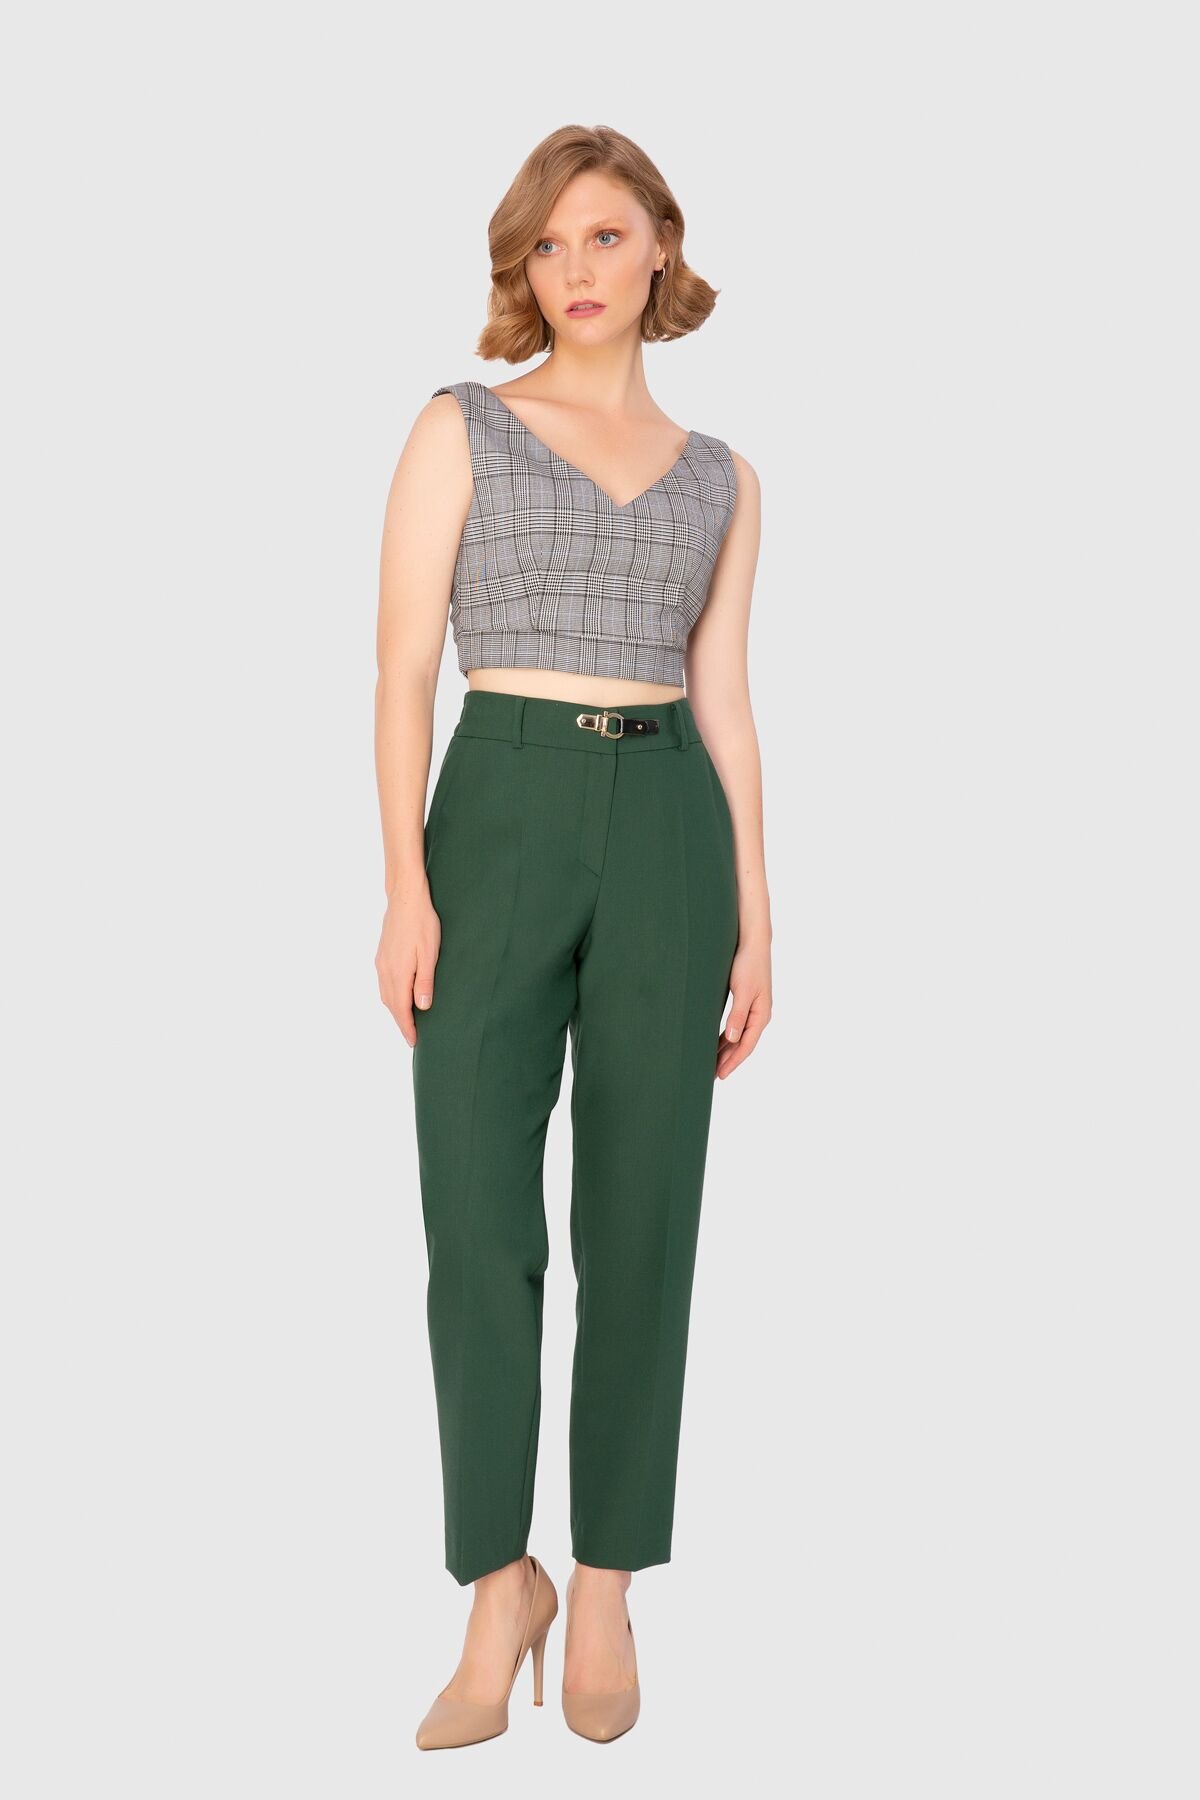 Metal Leather Accessories Pocket Carrot Green Trousers